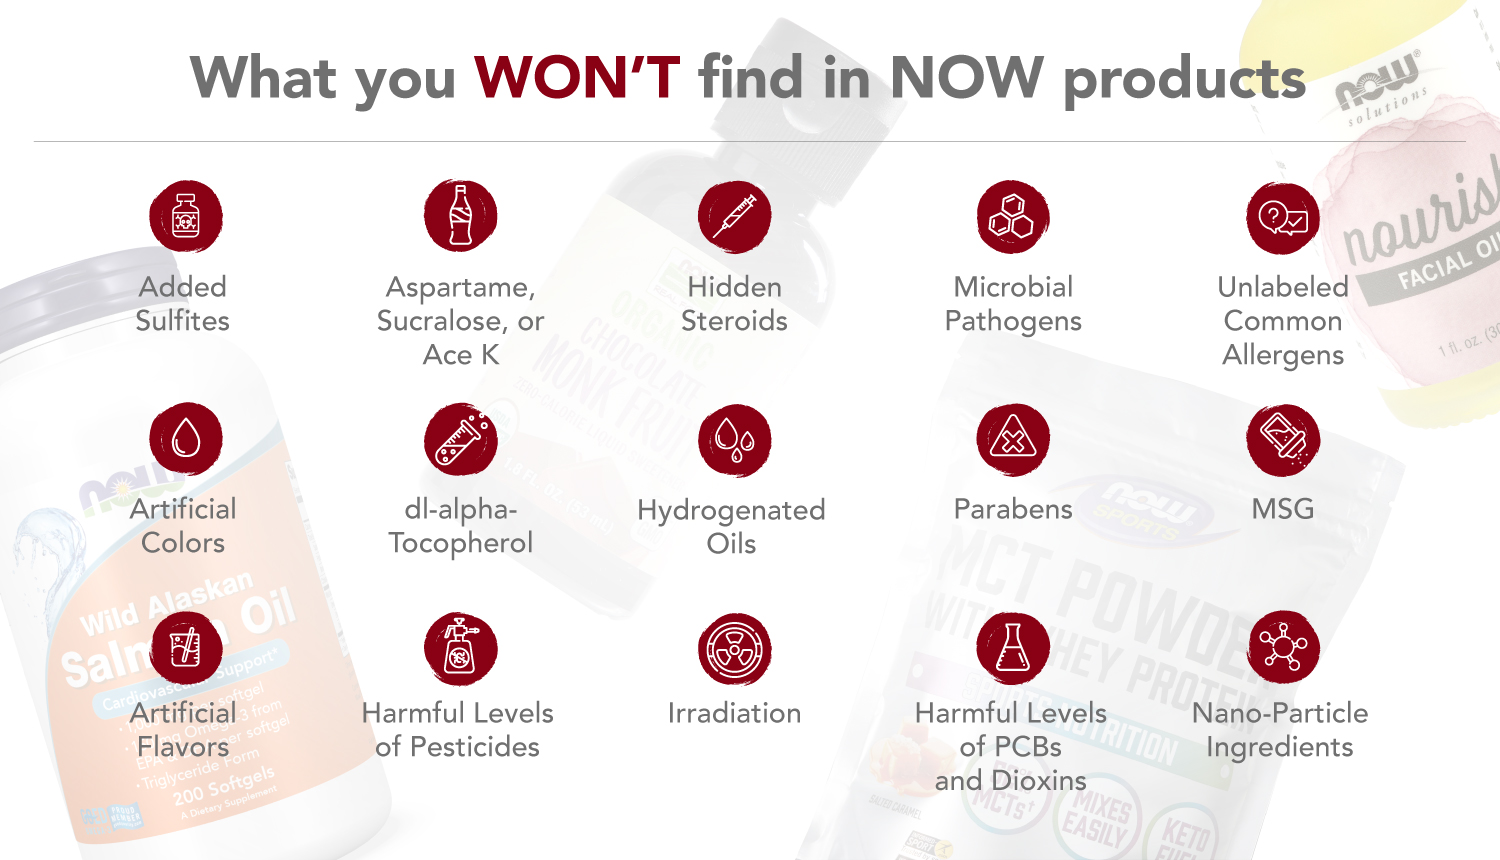 What you won't find in NOW products infographic: added sulfites, aspartame, sucralose, or acesulfame k, hidden steroids, microbial pathogens, unlabeled common allergens, artificial colors, dl-alpha-tocopherol, hydrogenated oils, parabens, msg, artificial flavors, harmful levels of pesticides, irradiation, harmful levels of pcbs and dioxins, nano-particle ingredients